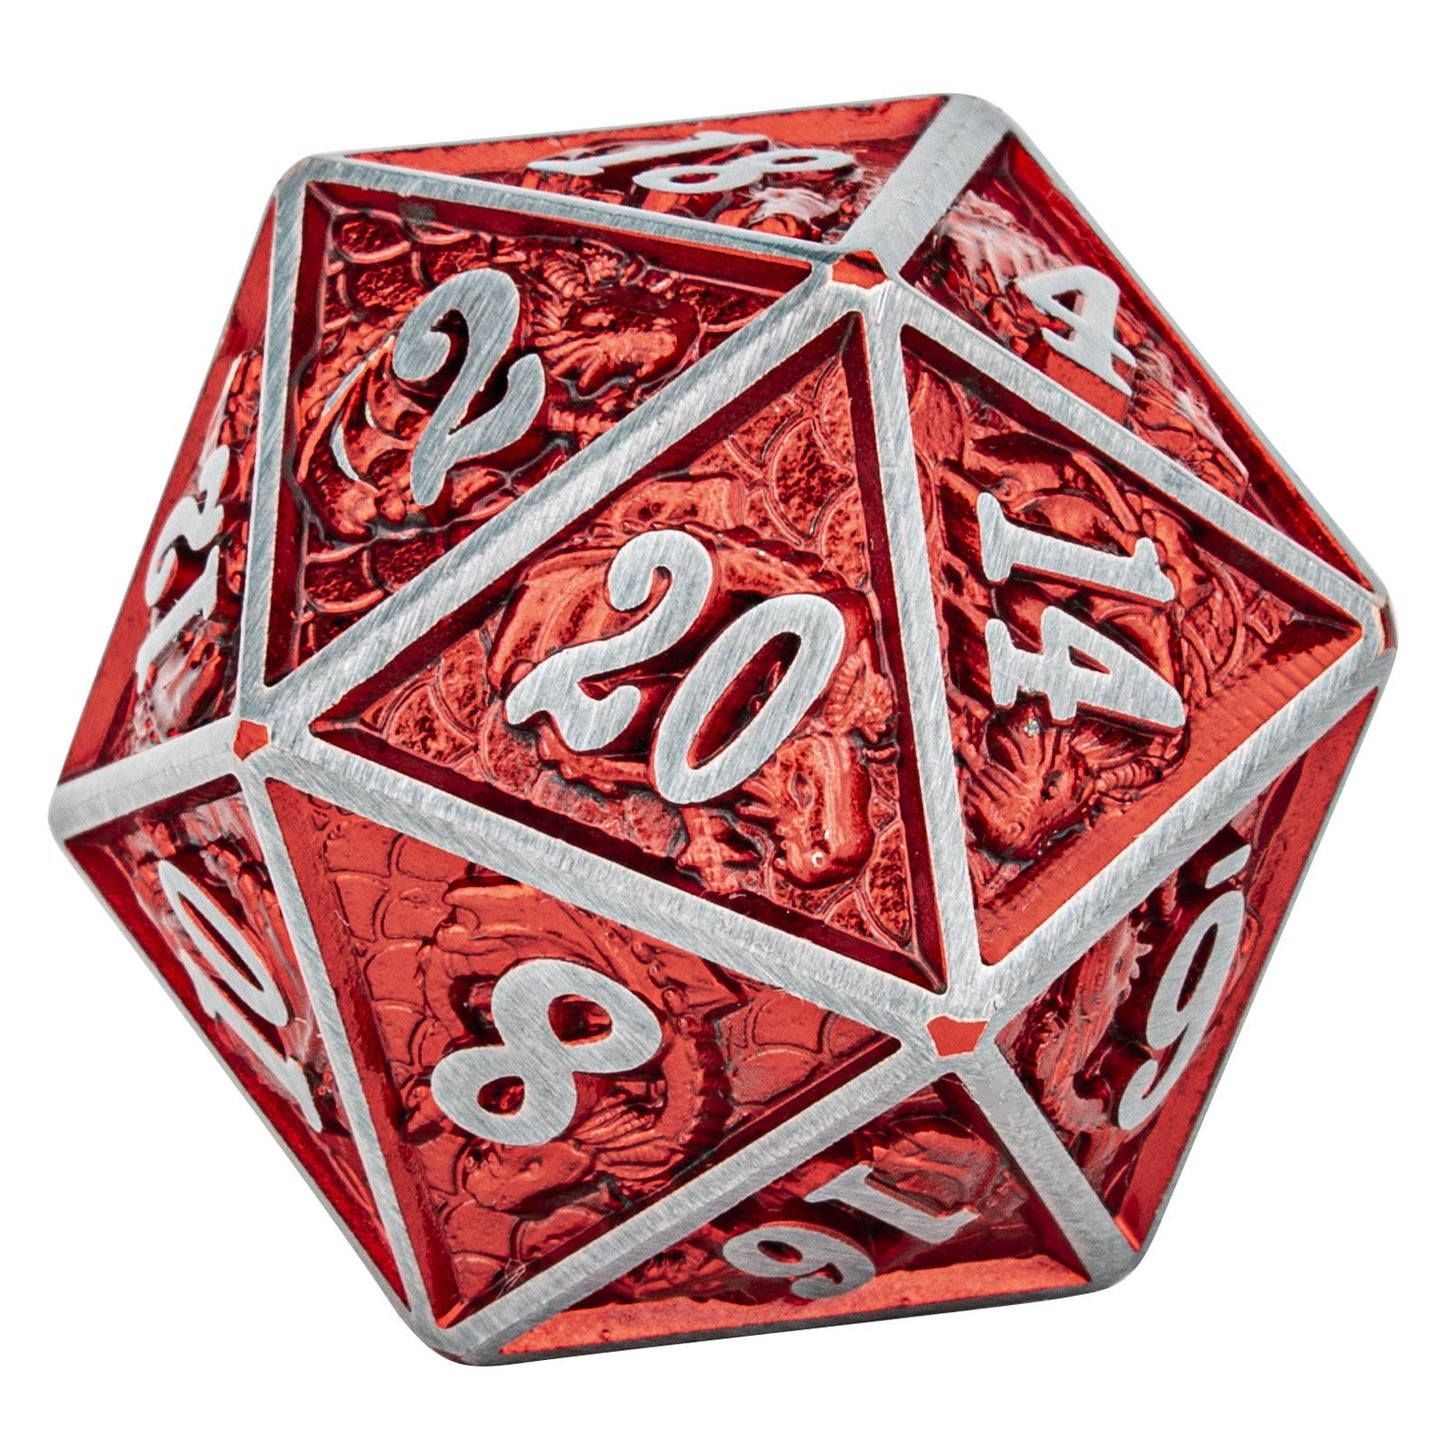 Pewter frame with ember deep red 2 tone metal dice set for DnD table games - HYMGHO Dice 